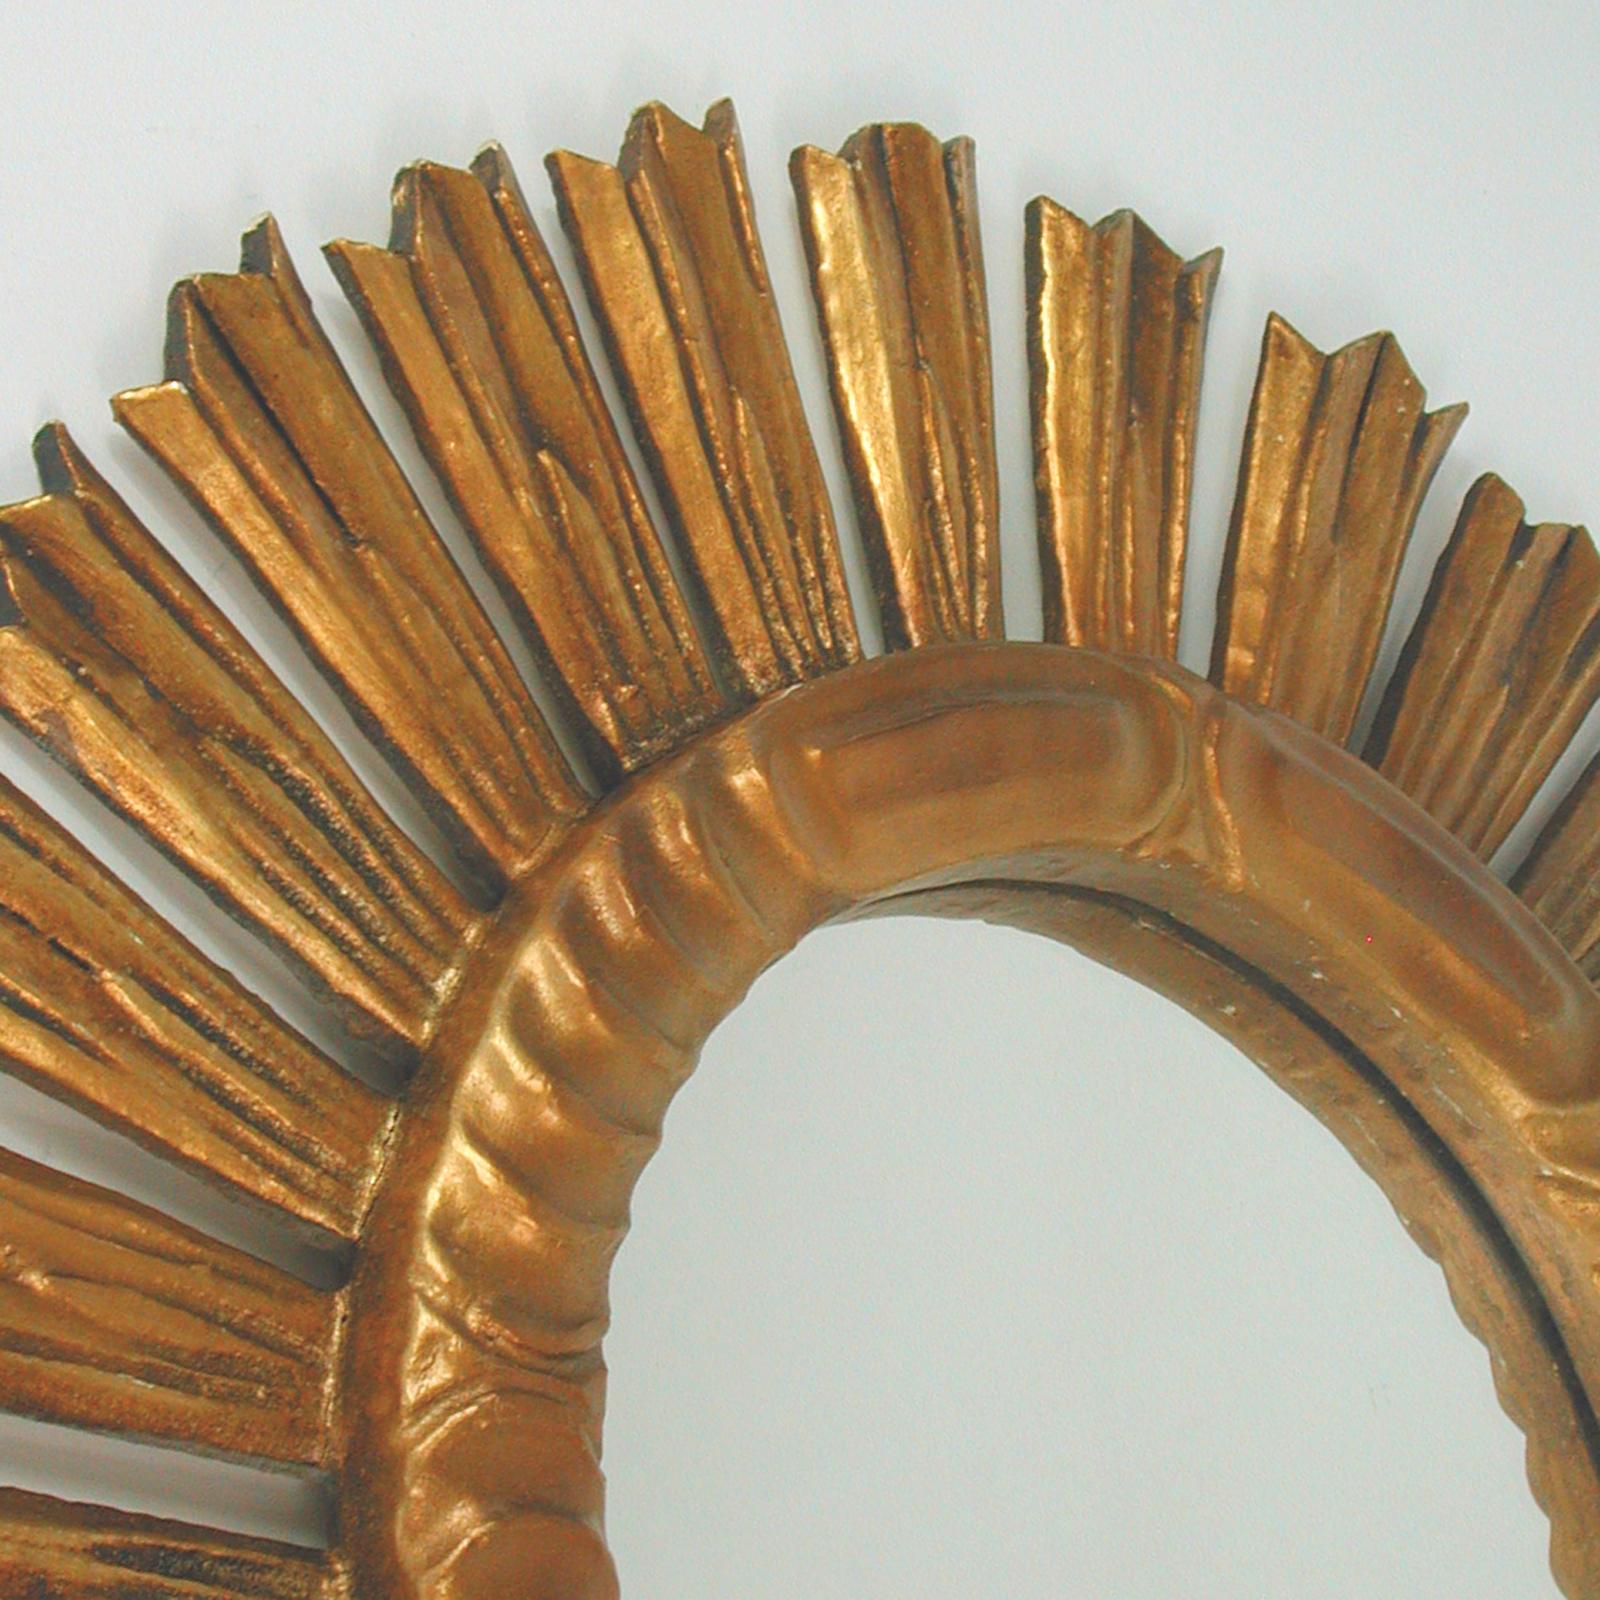 Spanish Sunburst Carved Giltwood Mirror, 1940s to 1950s For Sale 3